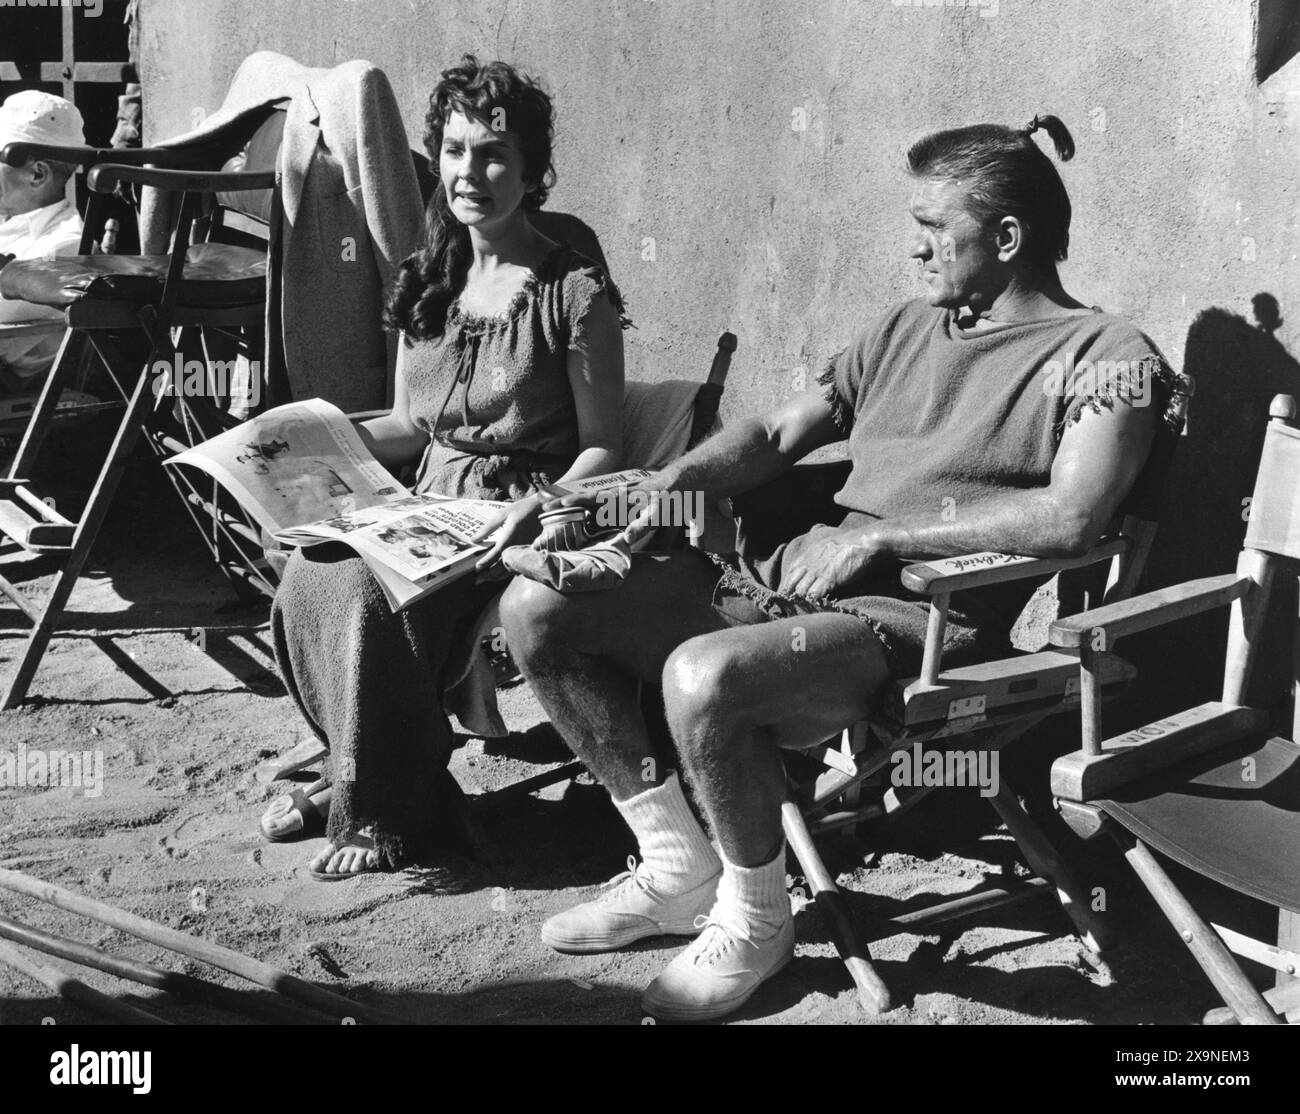 JEAN SIMMONS and KIRK DOUGLAS chat together during a break in filming on the set of SPARTACUS 1960 Director STANLEY KUBRICK Novel HOWARD FAST Screenplay DALTON TRUMBO Music ALEX NORTH Bryna Productions / Universal Pictures Stock Photo